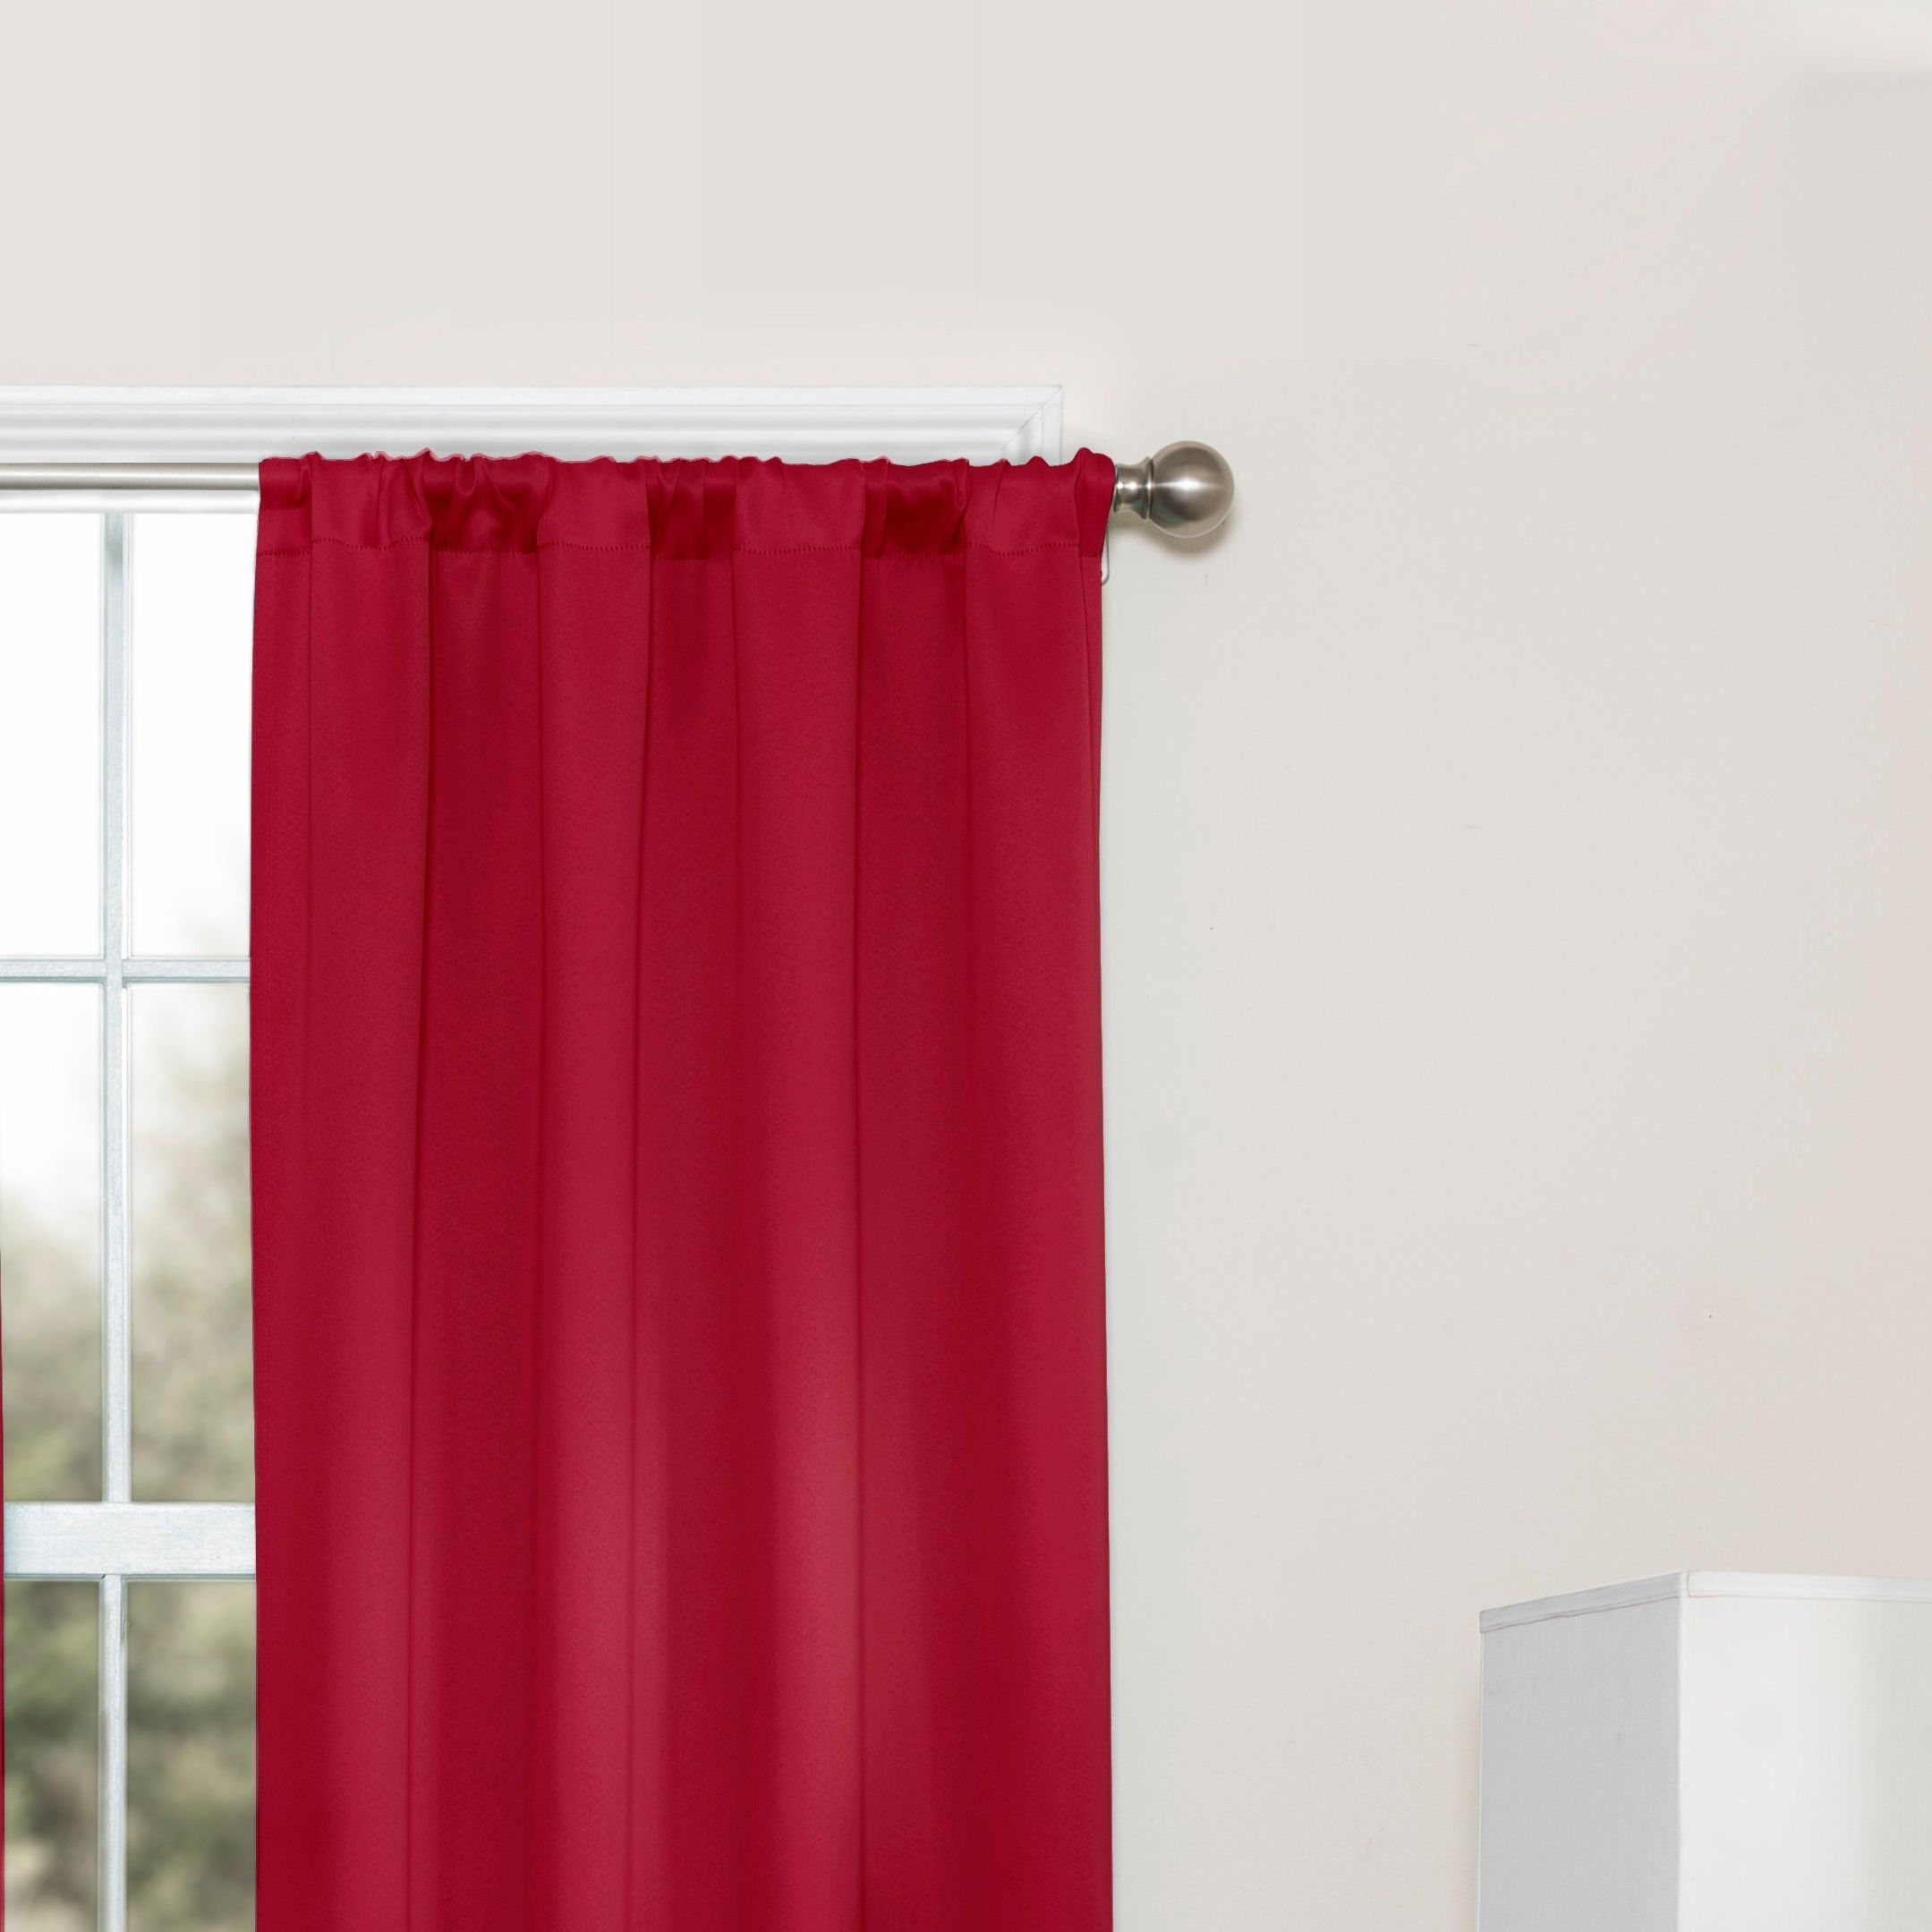 2020 Eclipse Darrell Thermaweave Blackout Window Curtain Panel Throughout Eclipse Darrell Thermaweave Blackout Window Curtain Panels (View 4 of 20)